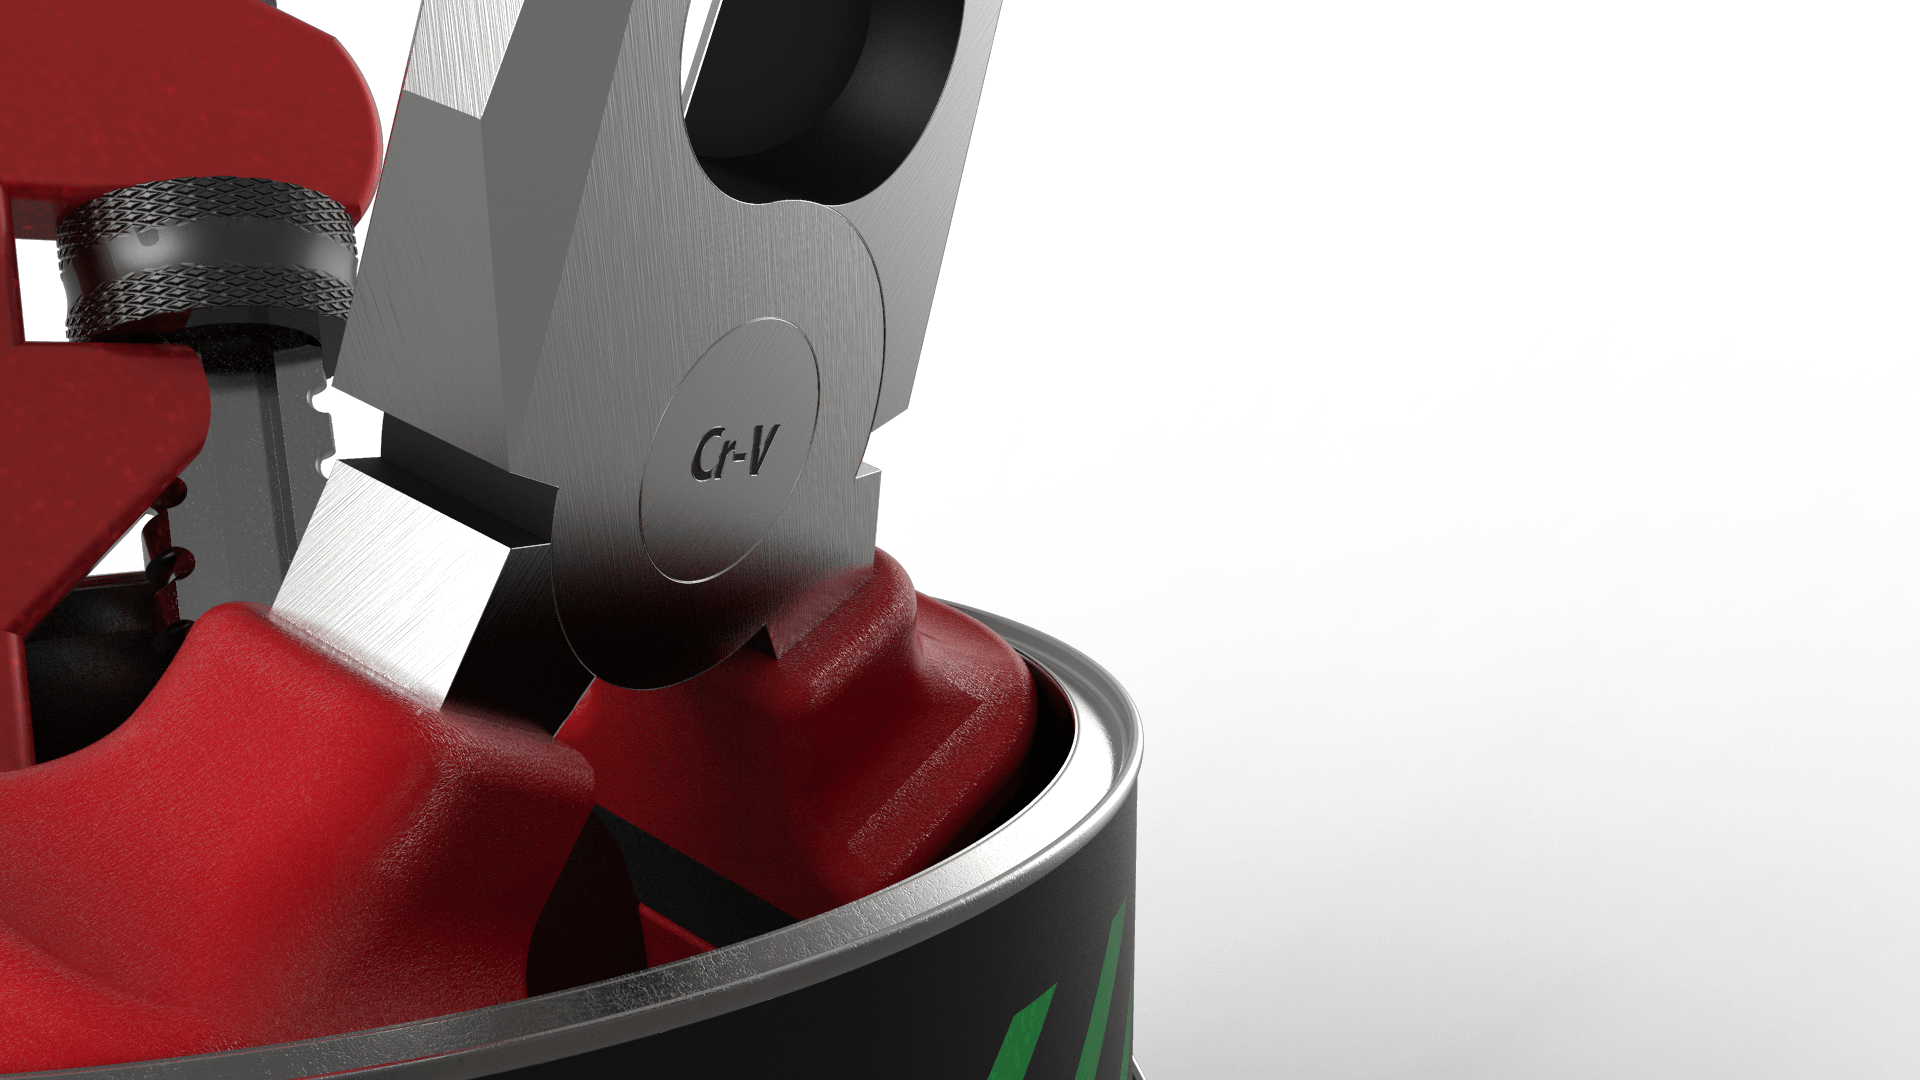 rendered image of pair of pliers with advanced textures